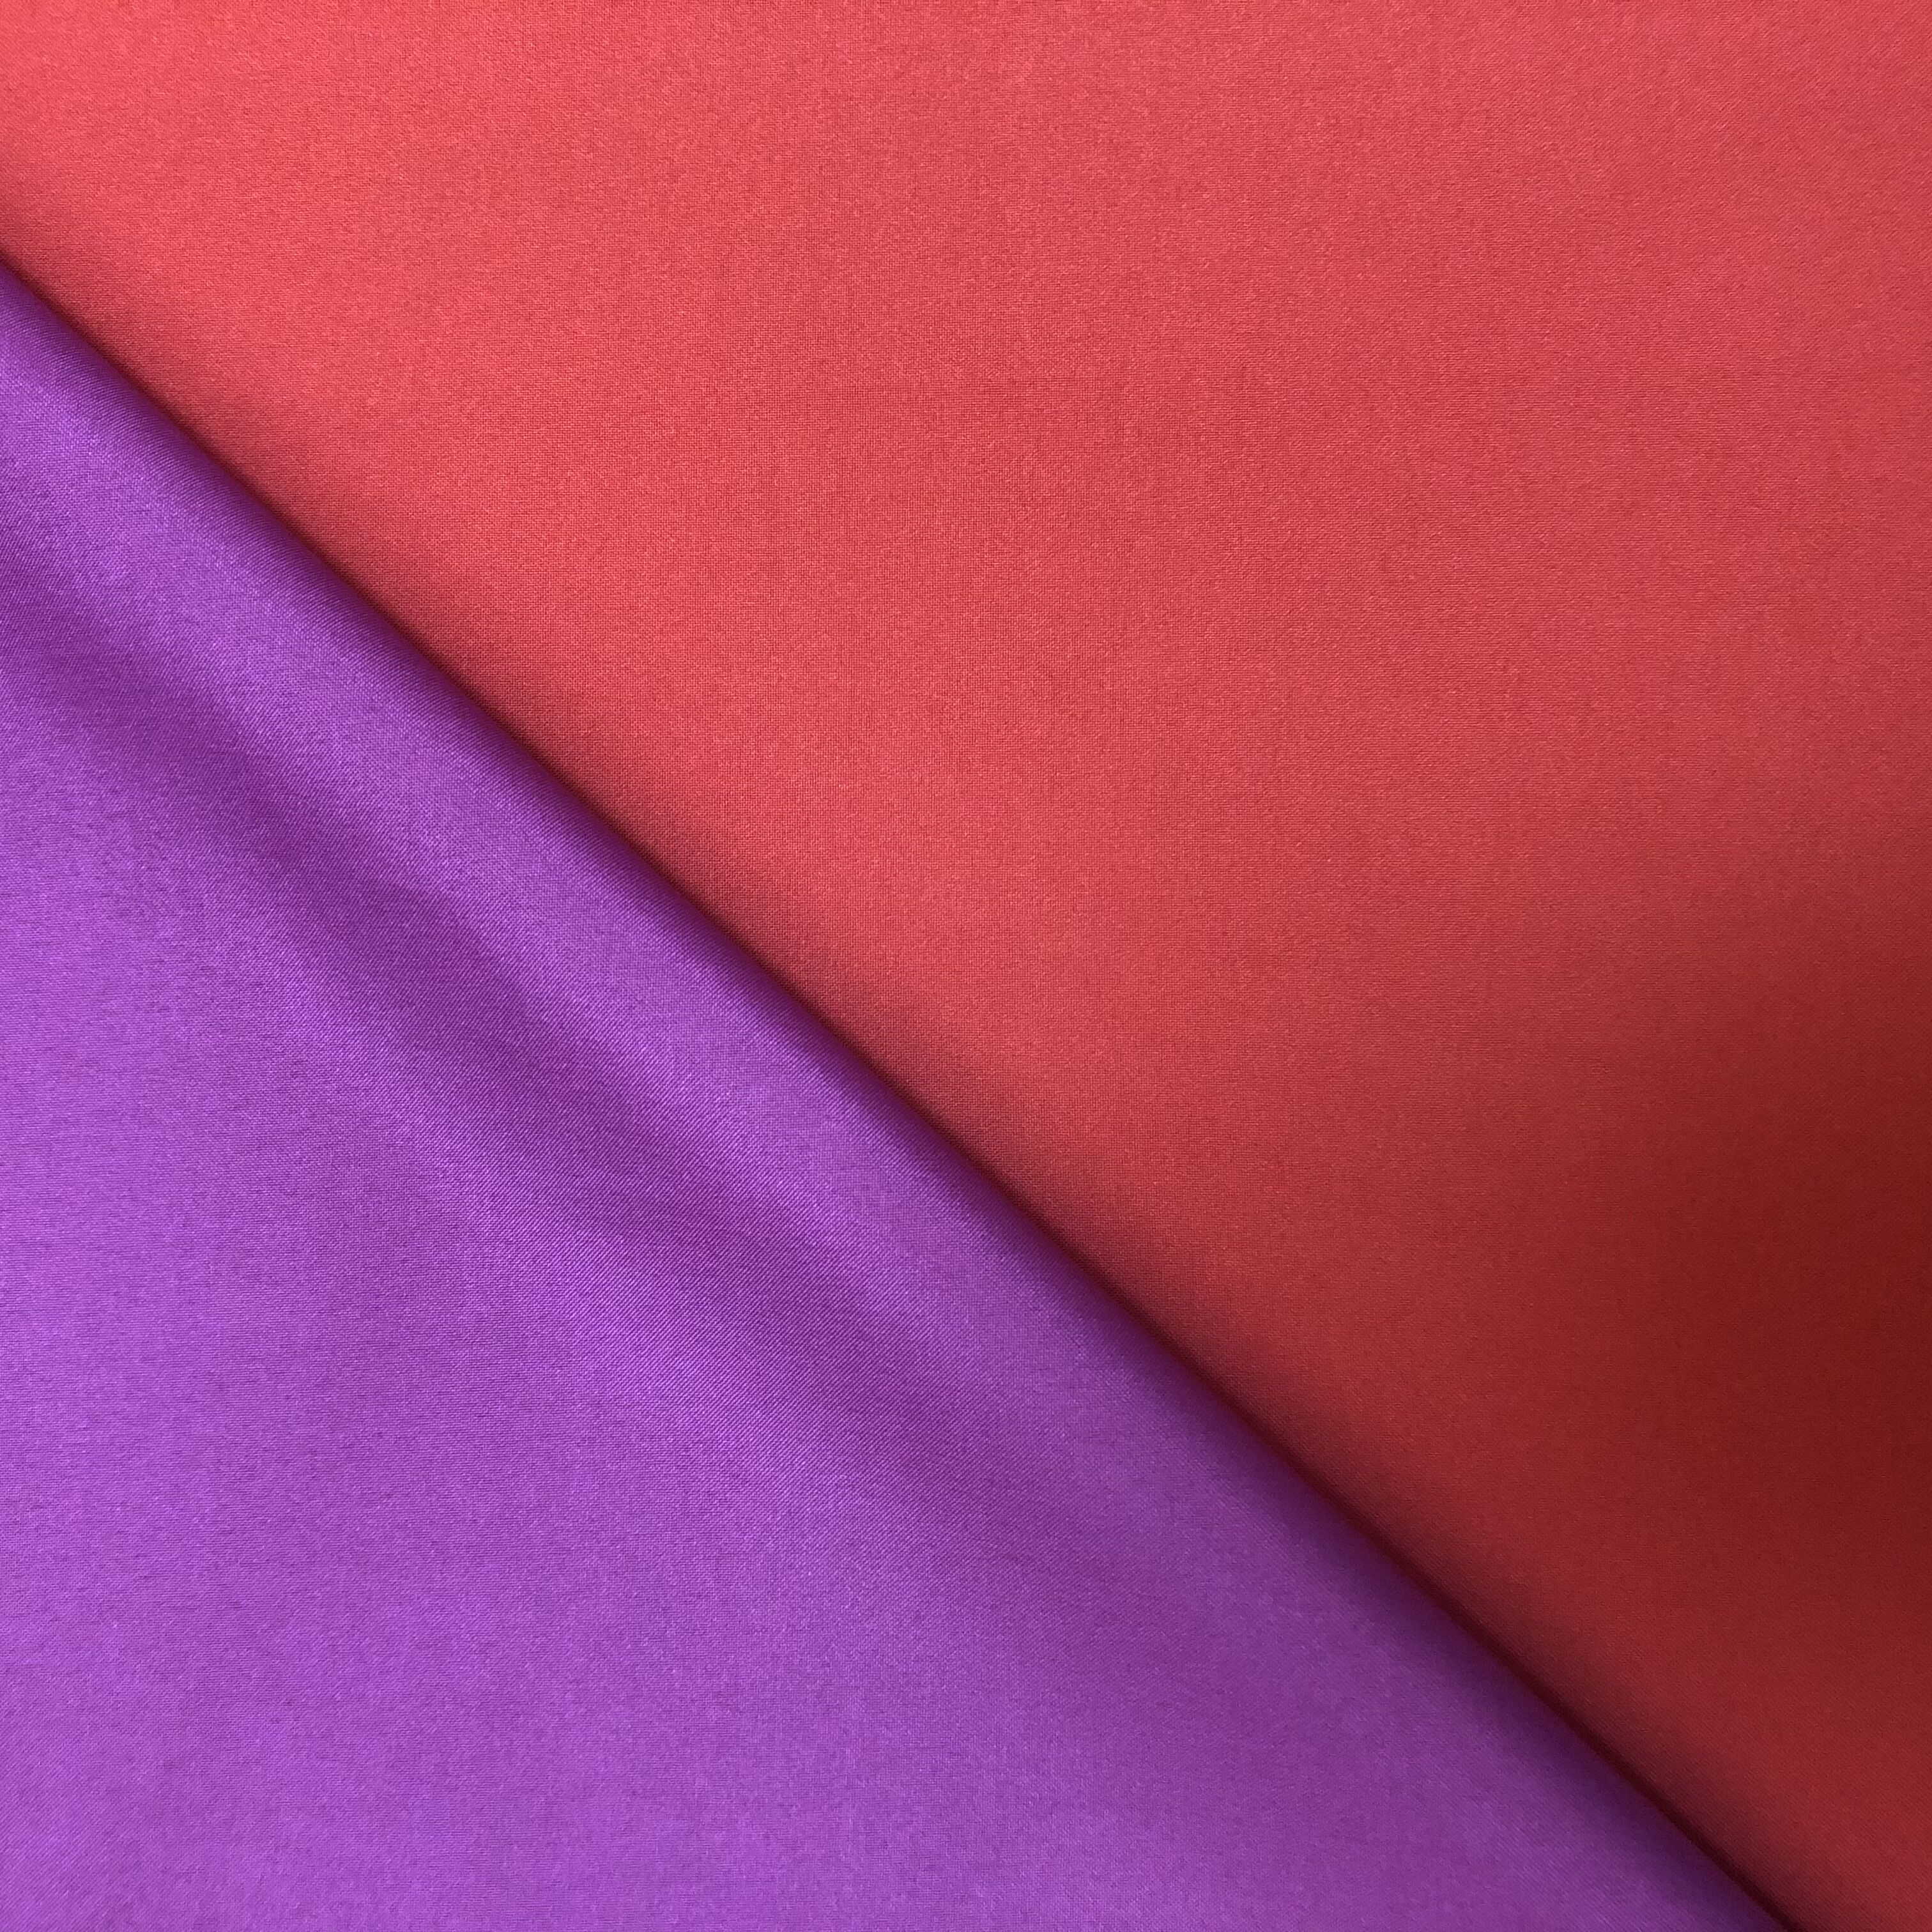 100%polyester Microfiber Dyed Fabric 